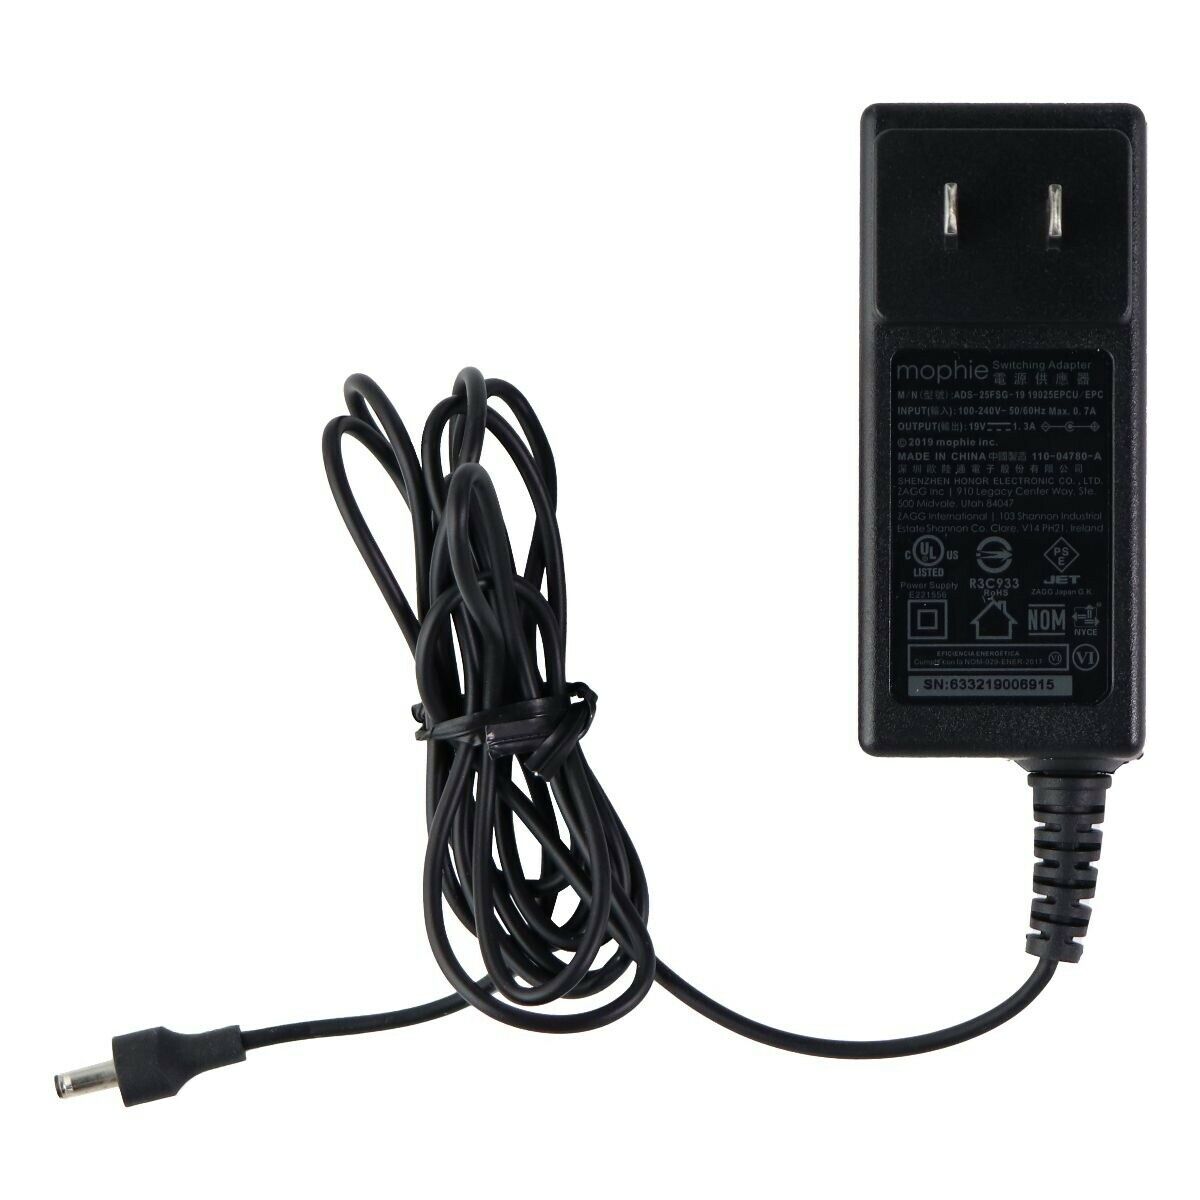 Mophie (19V/1.3A) Wall Charger Power Adapter - Black (ADS-25FSG-19) Brand: Mophie MPN: ADS-25FSG-19 UPC: 249612135 - Click Image to Close